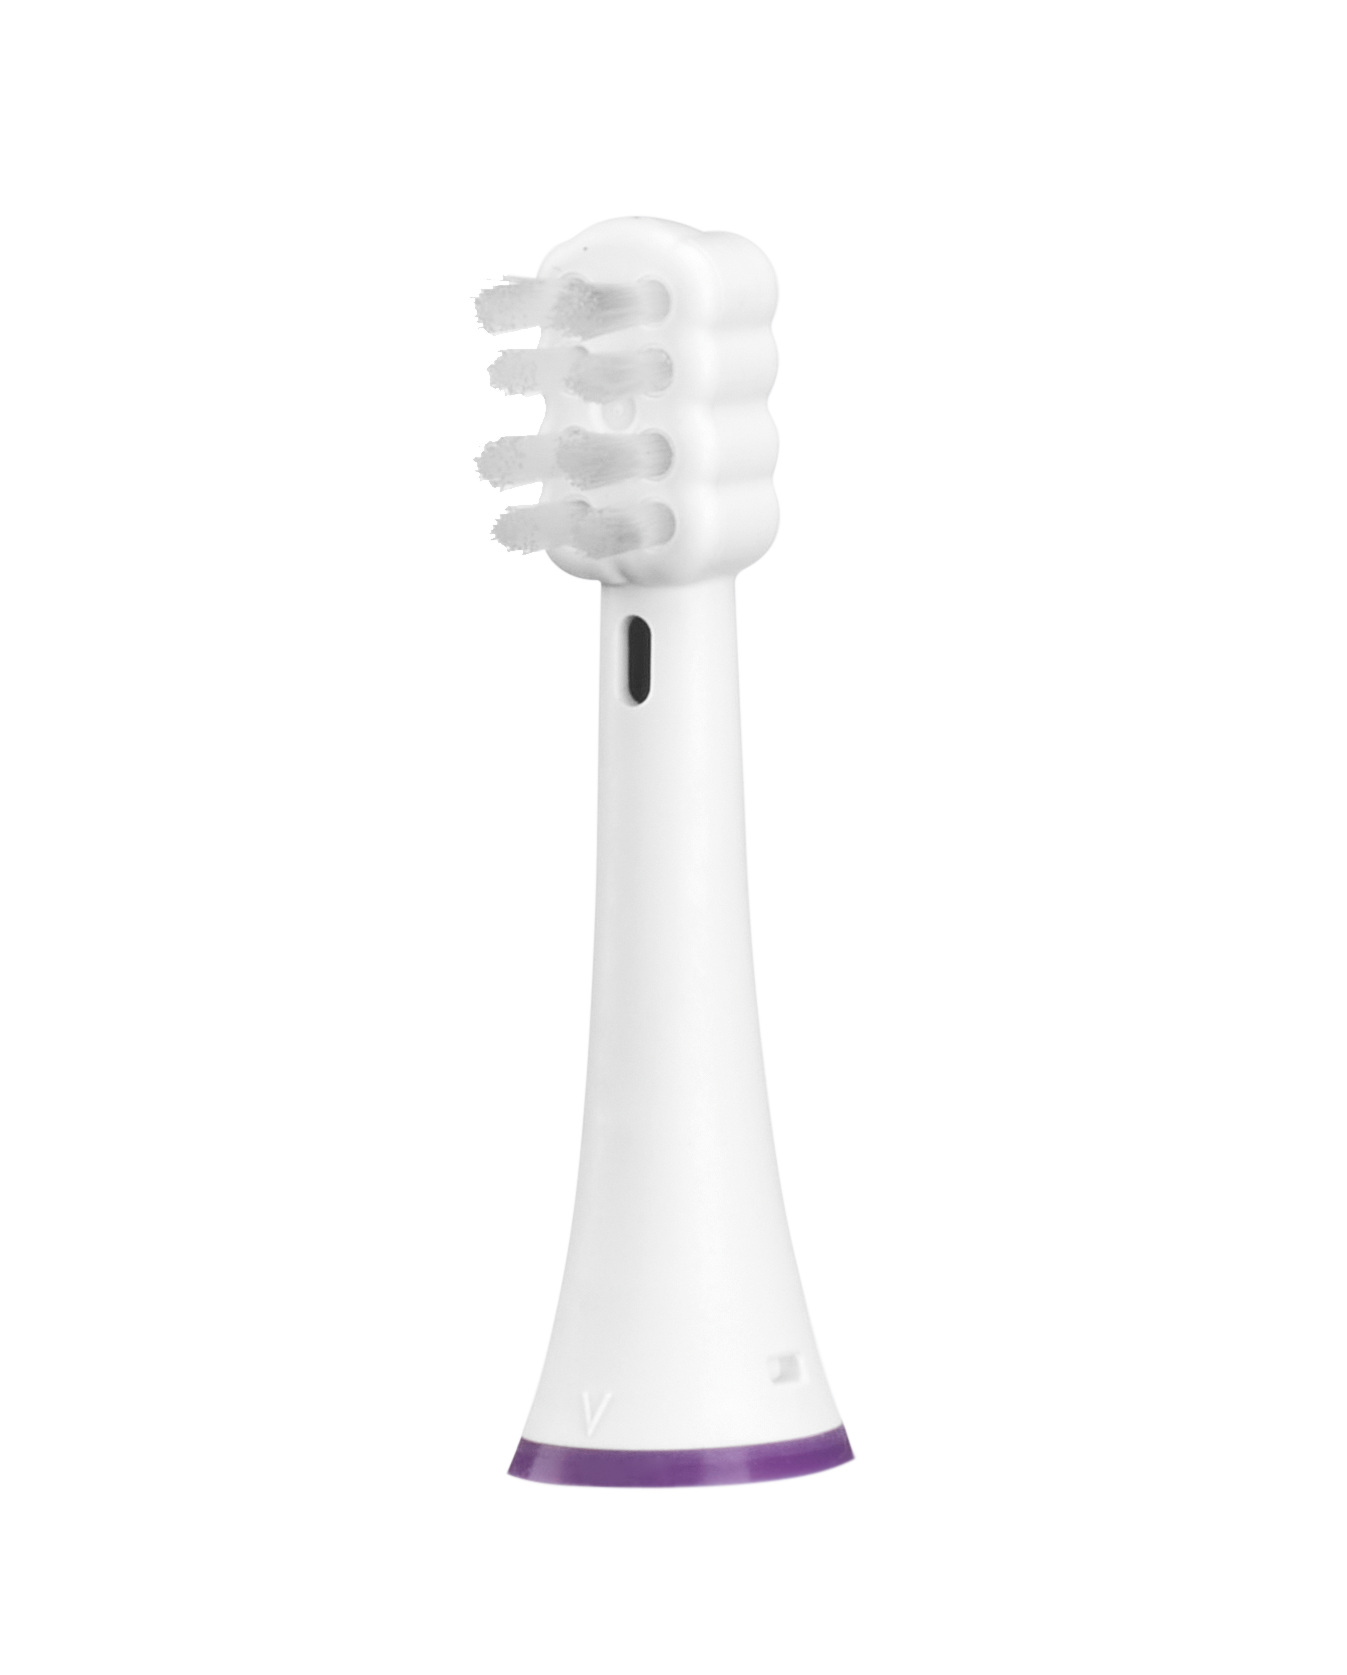 buy oscill8 toothbrush accessories